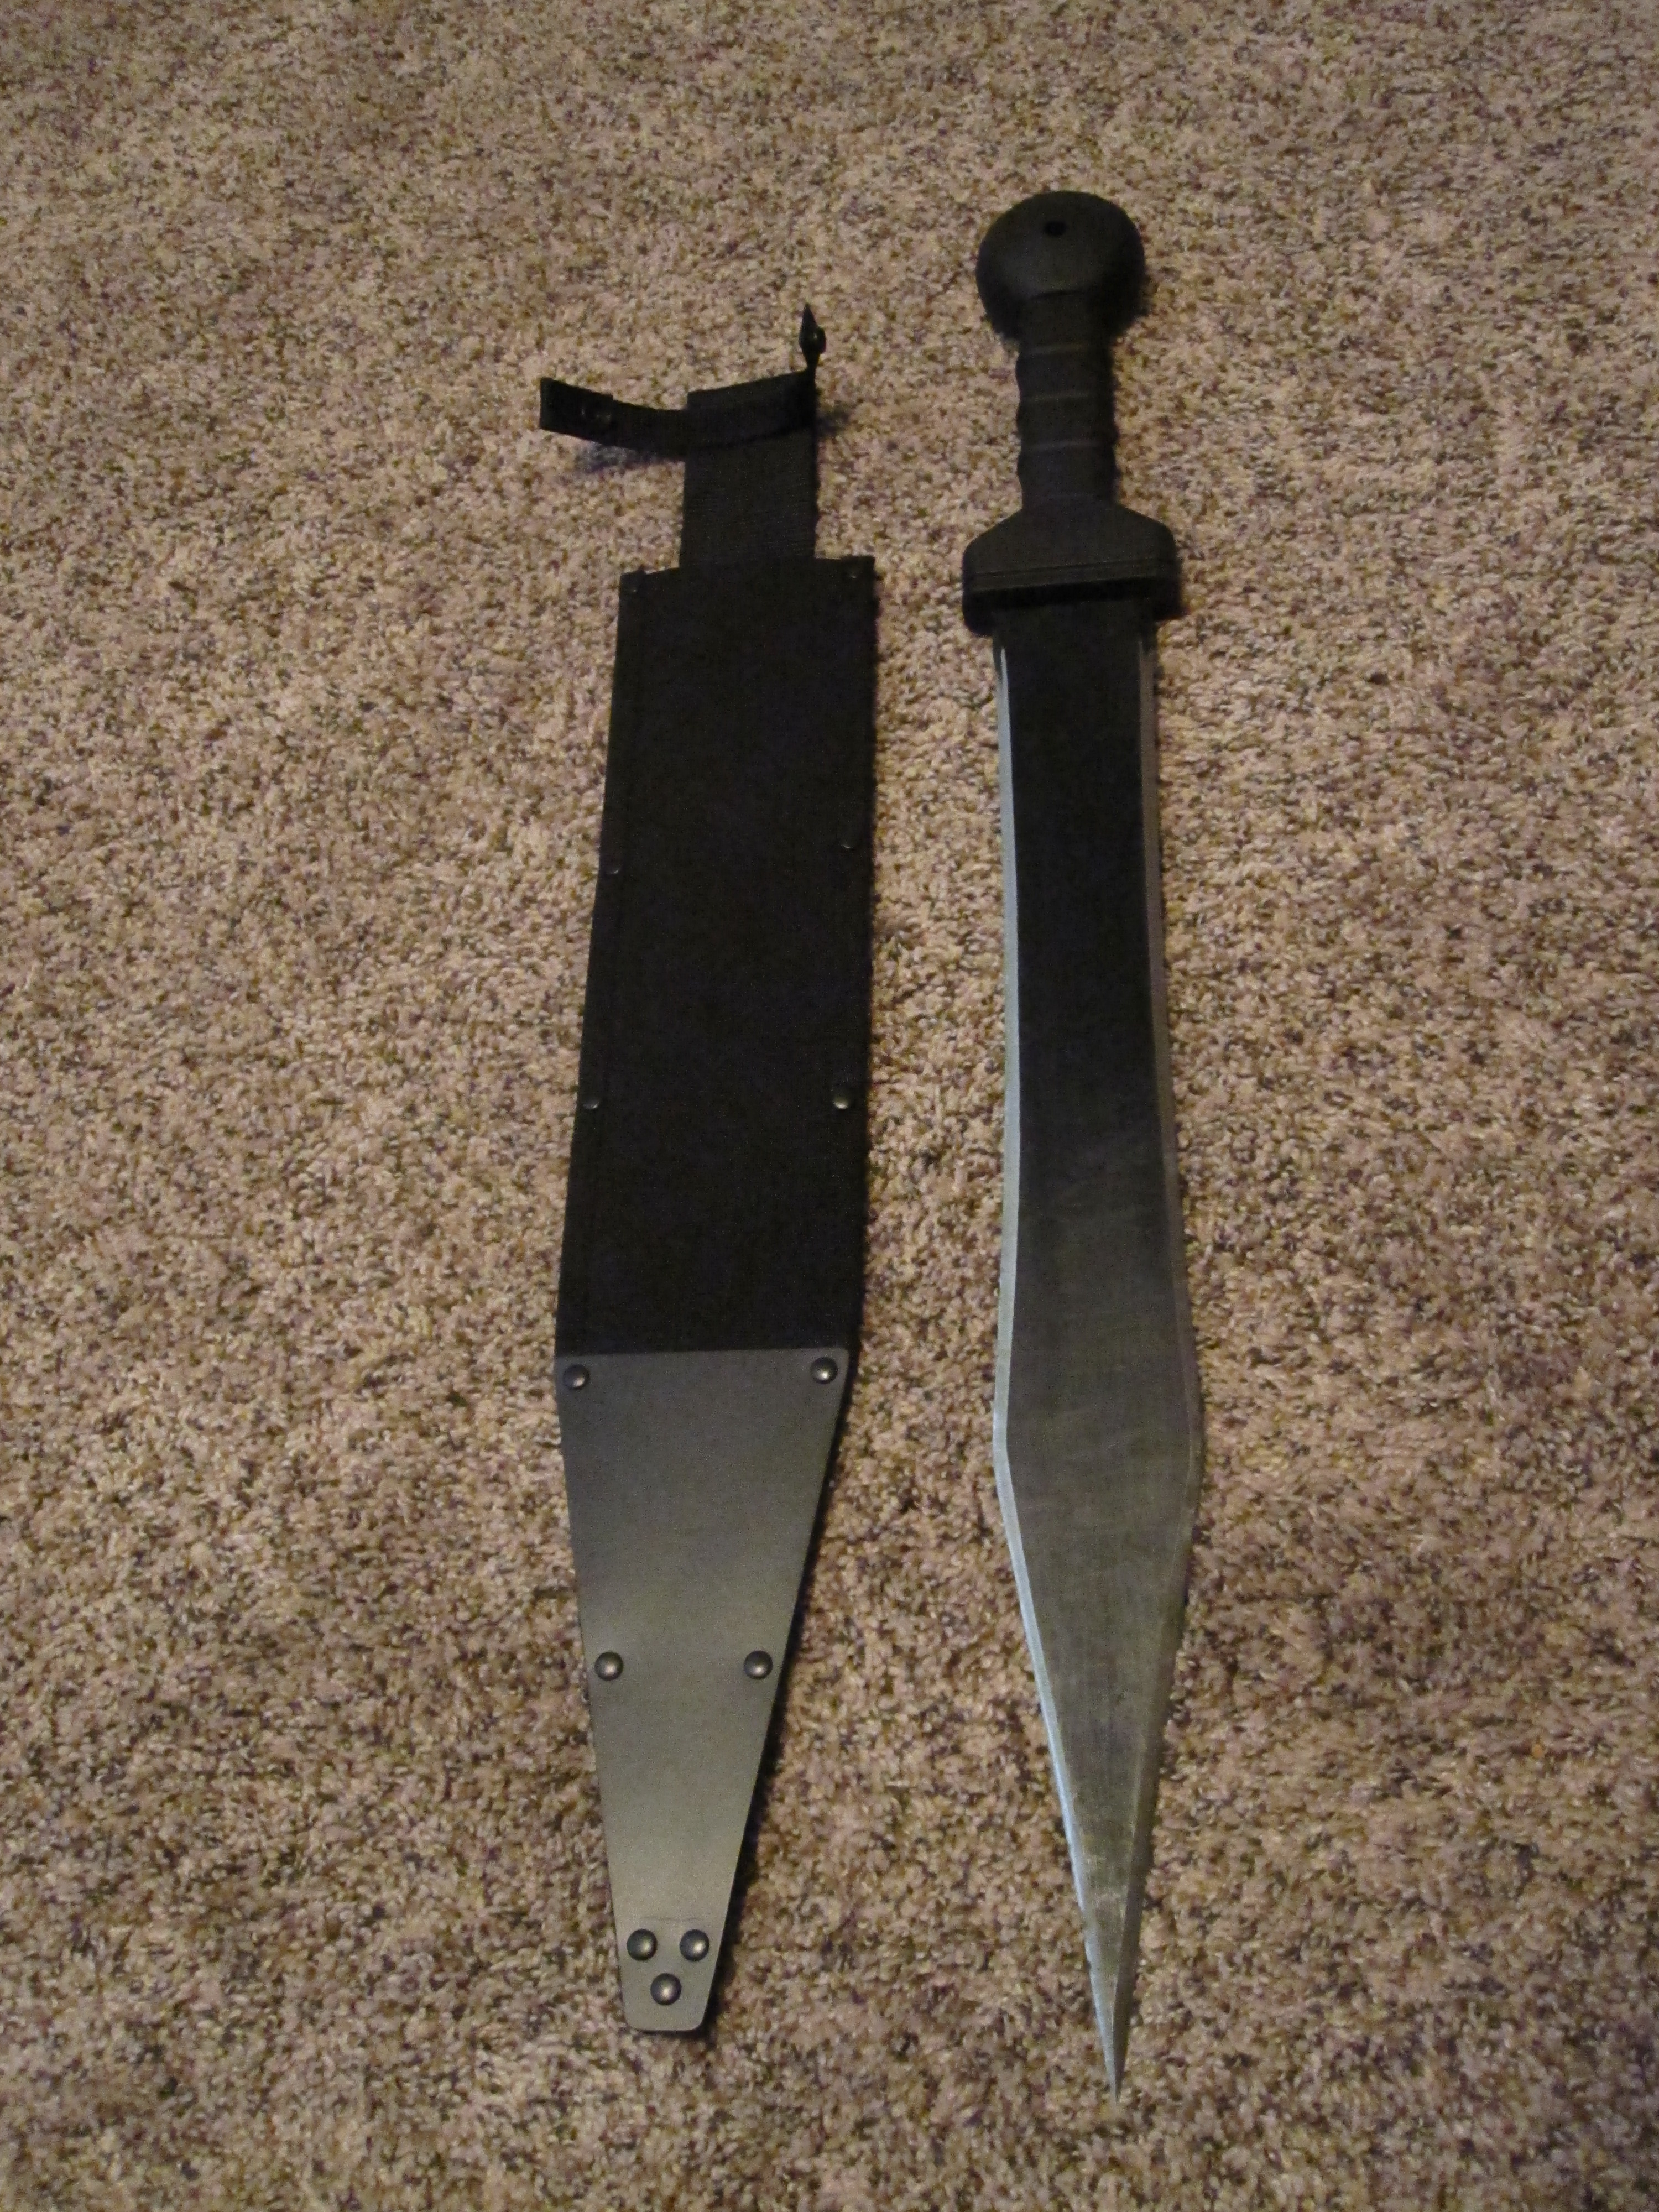 Scarydad Review Cold Steel Gladius Machete The Scarydad Podcast 